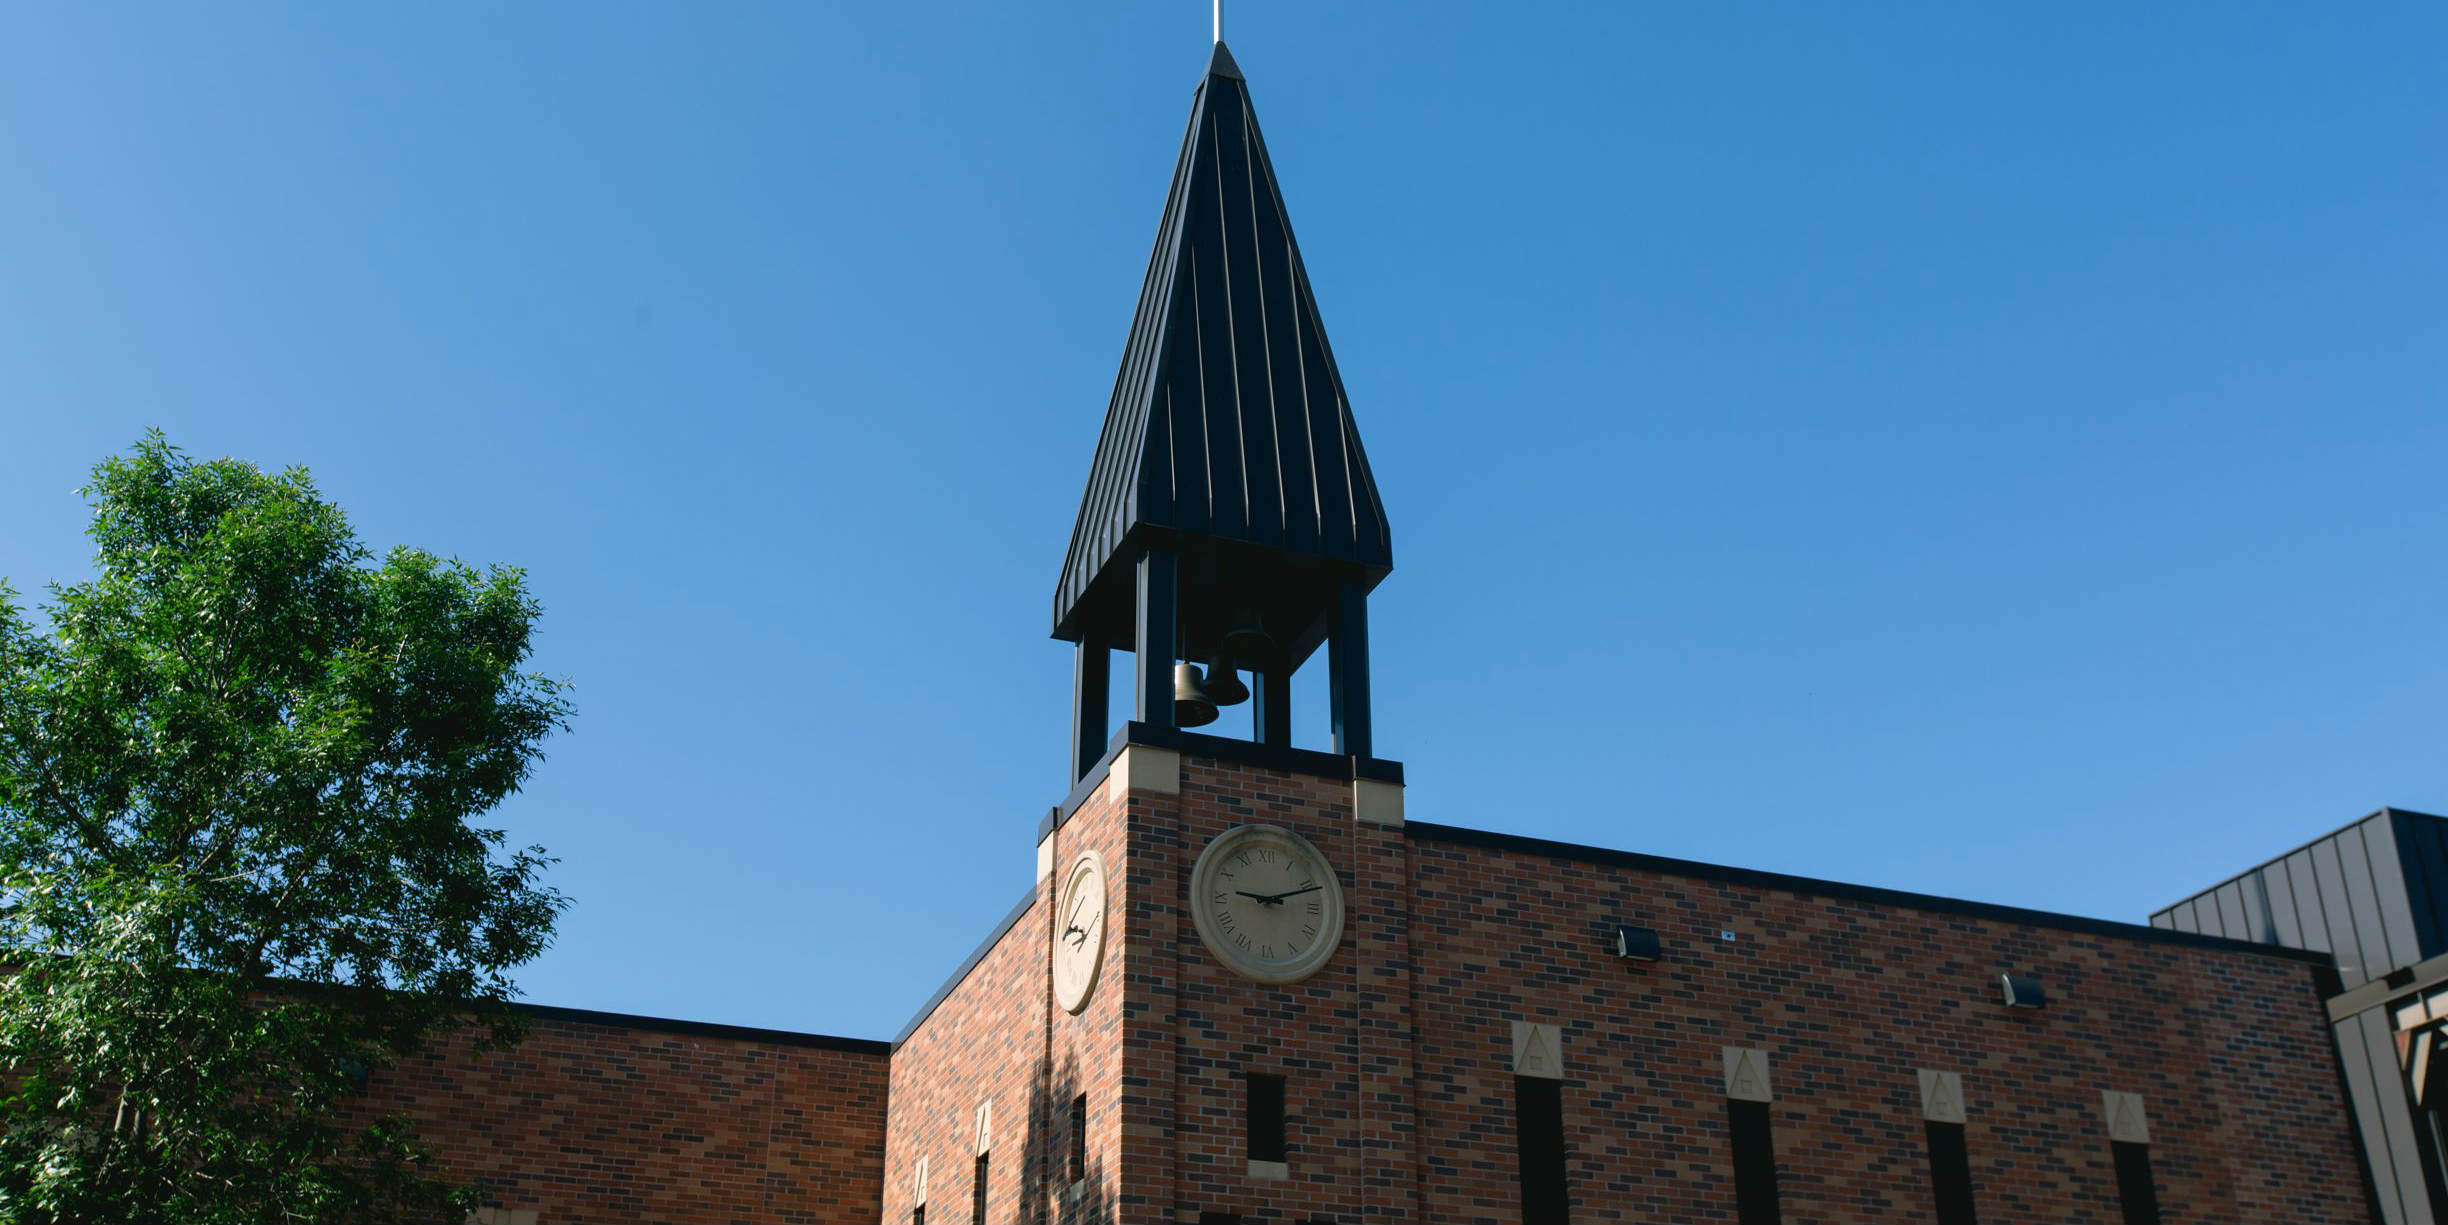 The clock tower of the Trask Word & Worship Center.